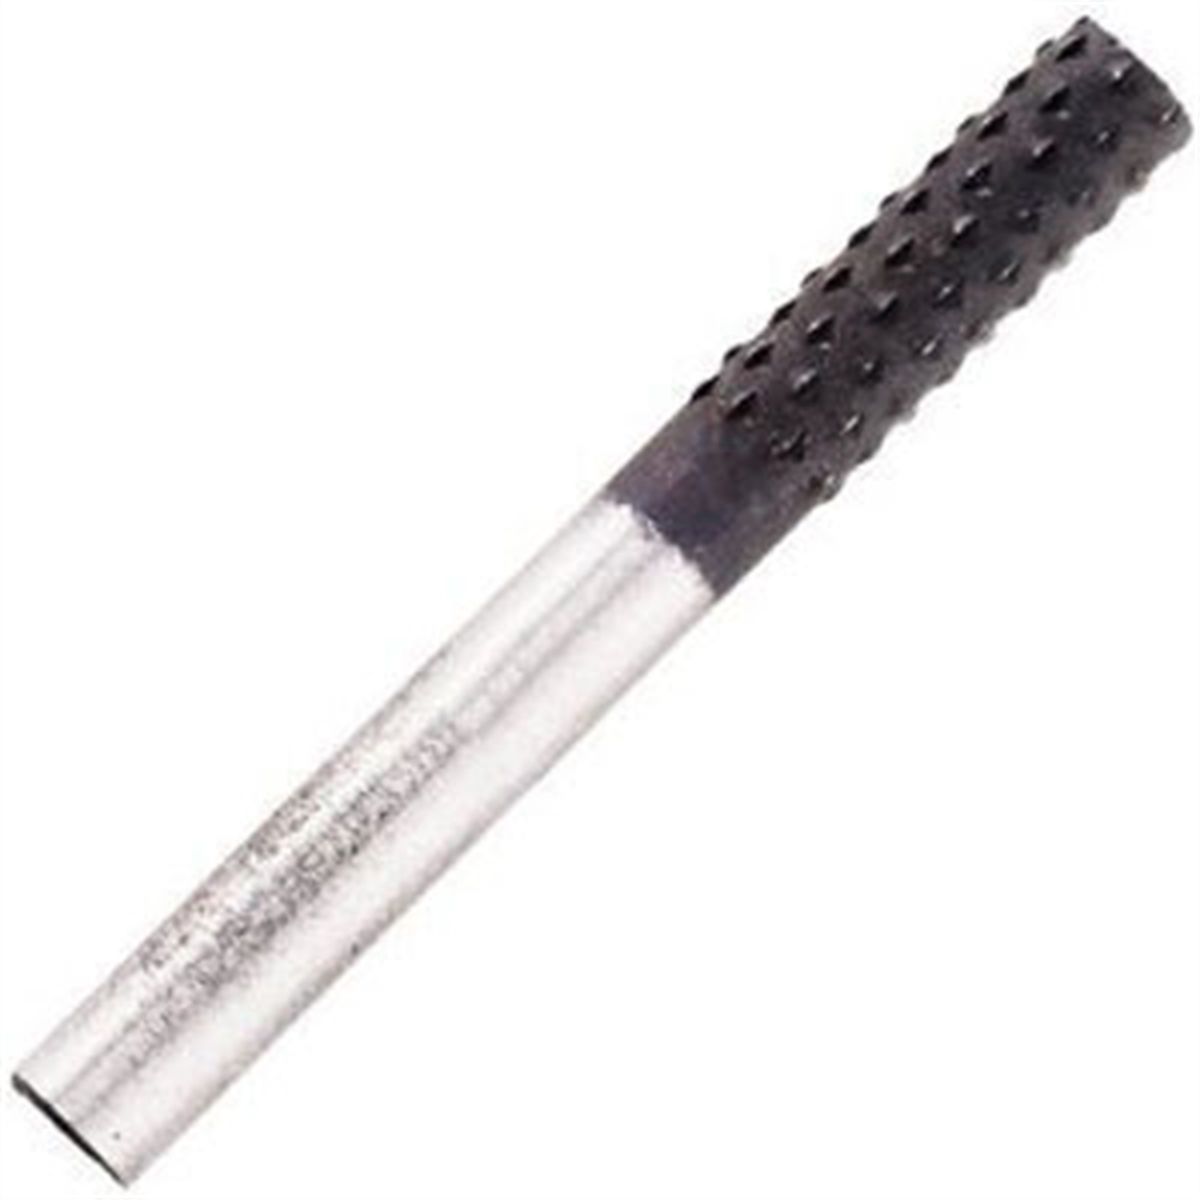 Rotary Rasp for Wood Cutting, 1/4 In x 7/8 In